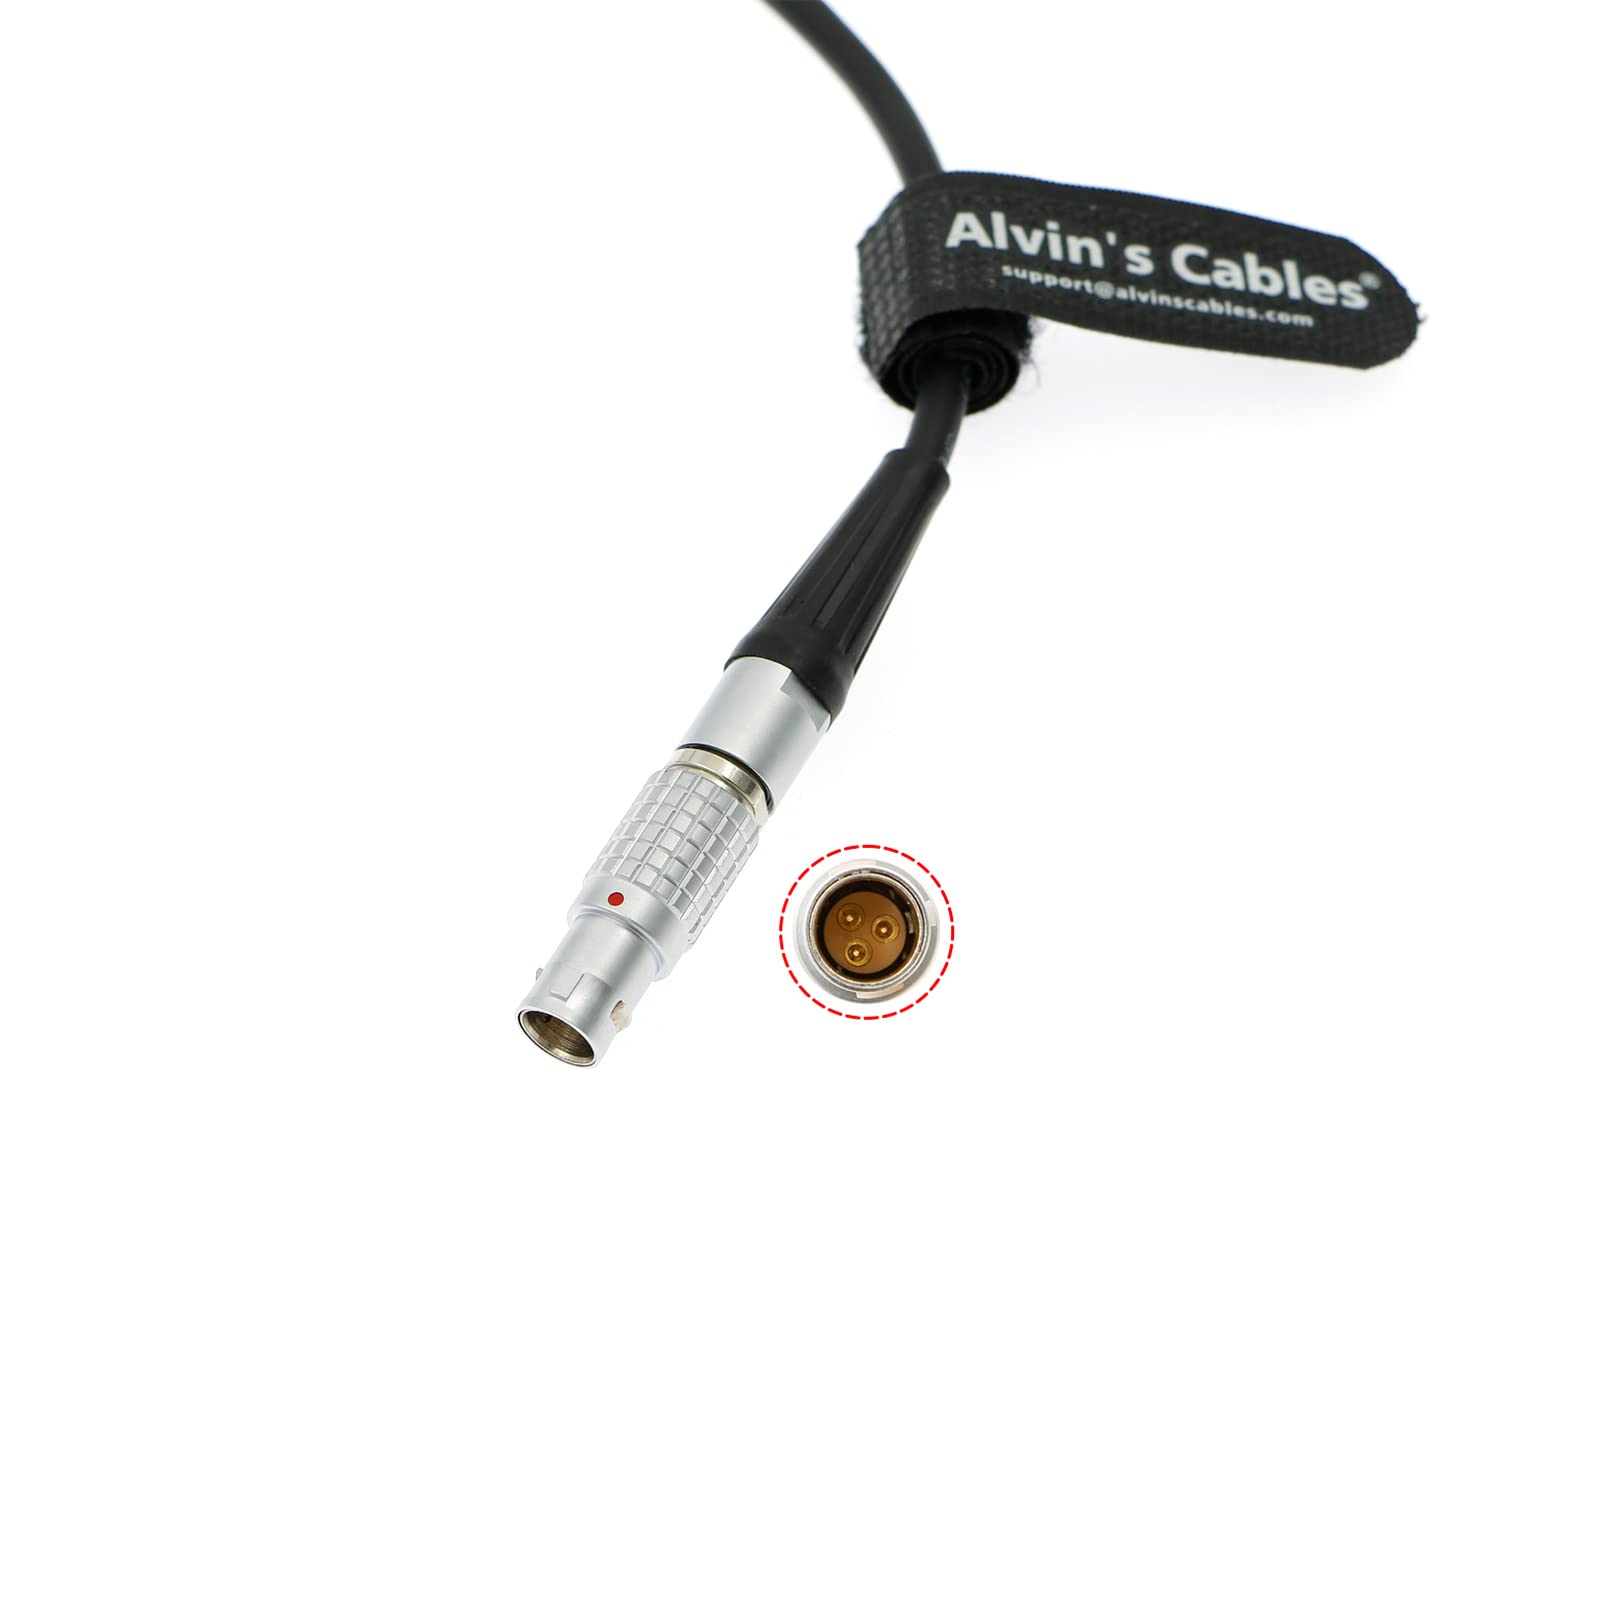 Alvin's Cables Power Cable for Sony Venice F55 SXS Camera for Steadicam M1 M2 Sled 2B 3 Pin Male to XLR 4 Pin Female 12V Power Cable